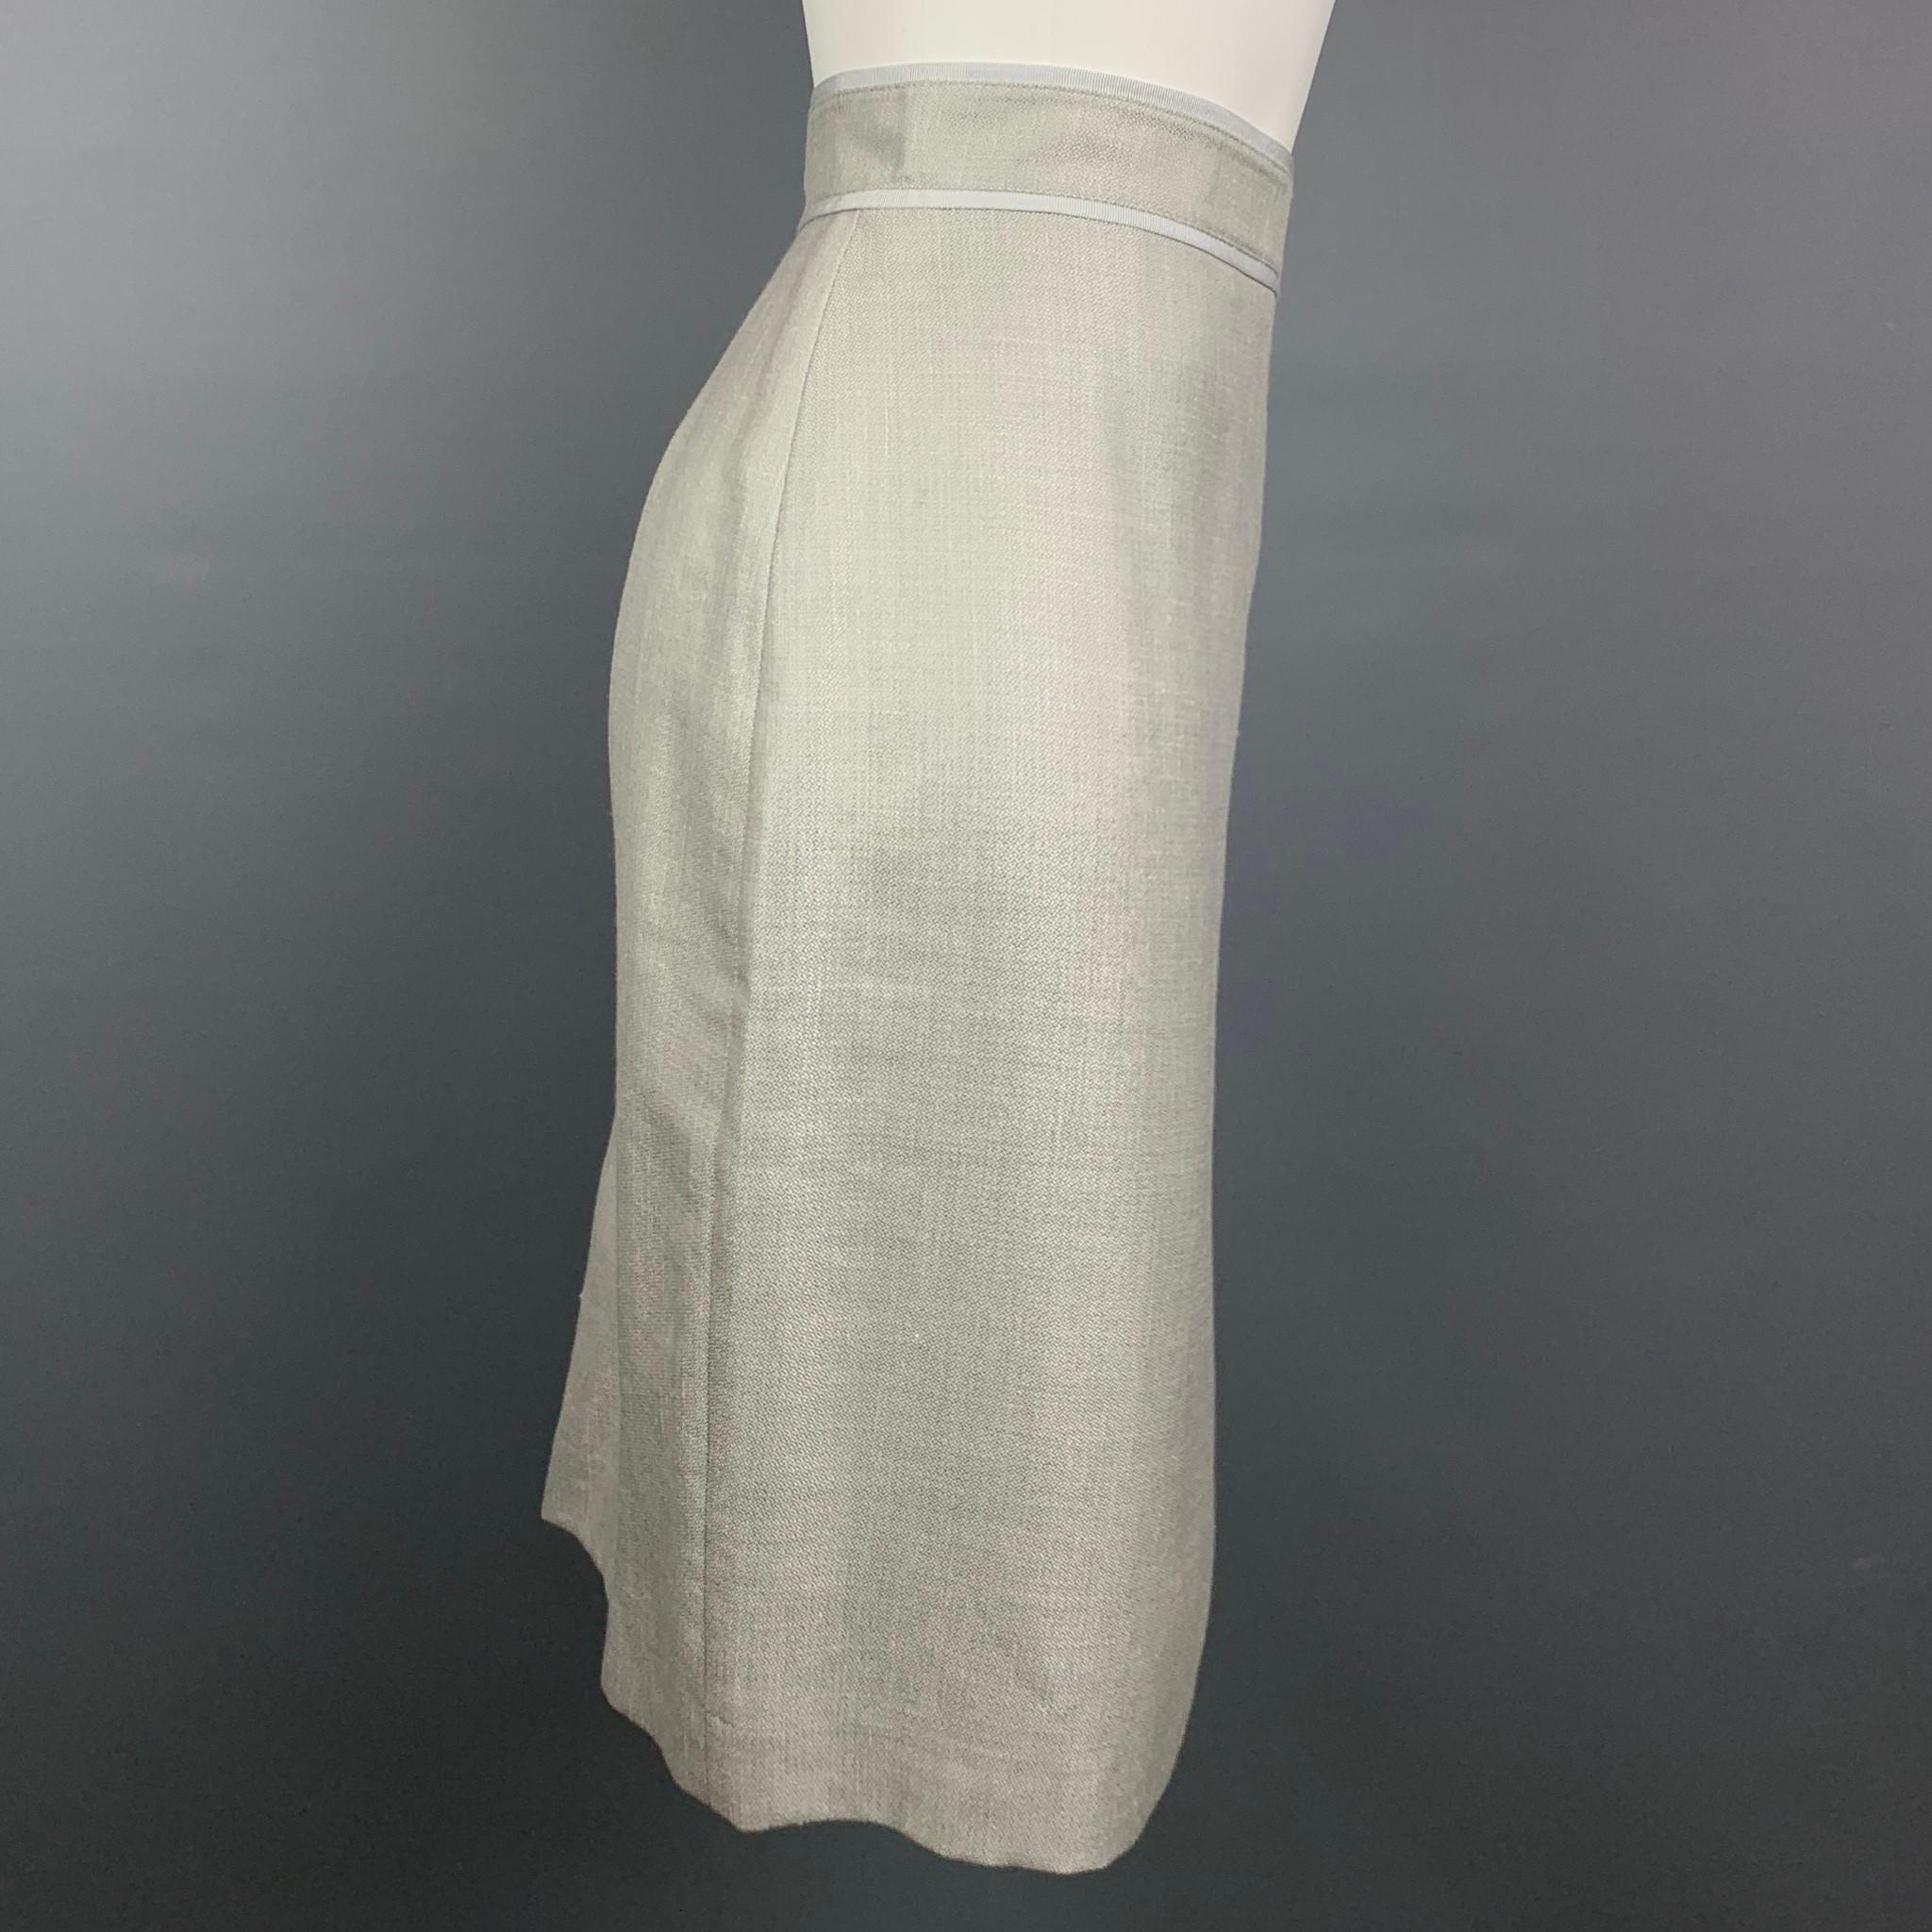 BROOKS BROTHERS skirt comes in a light gray wool blend with a slip liner featuring a pencil style, back pleats, and a back zip up closure. Fabric by Loro Piana.

Very Good Pre-Owned Condition.
Marked: 6
Original Retail Price: